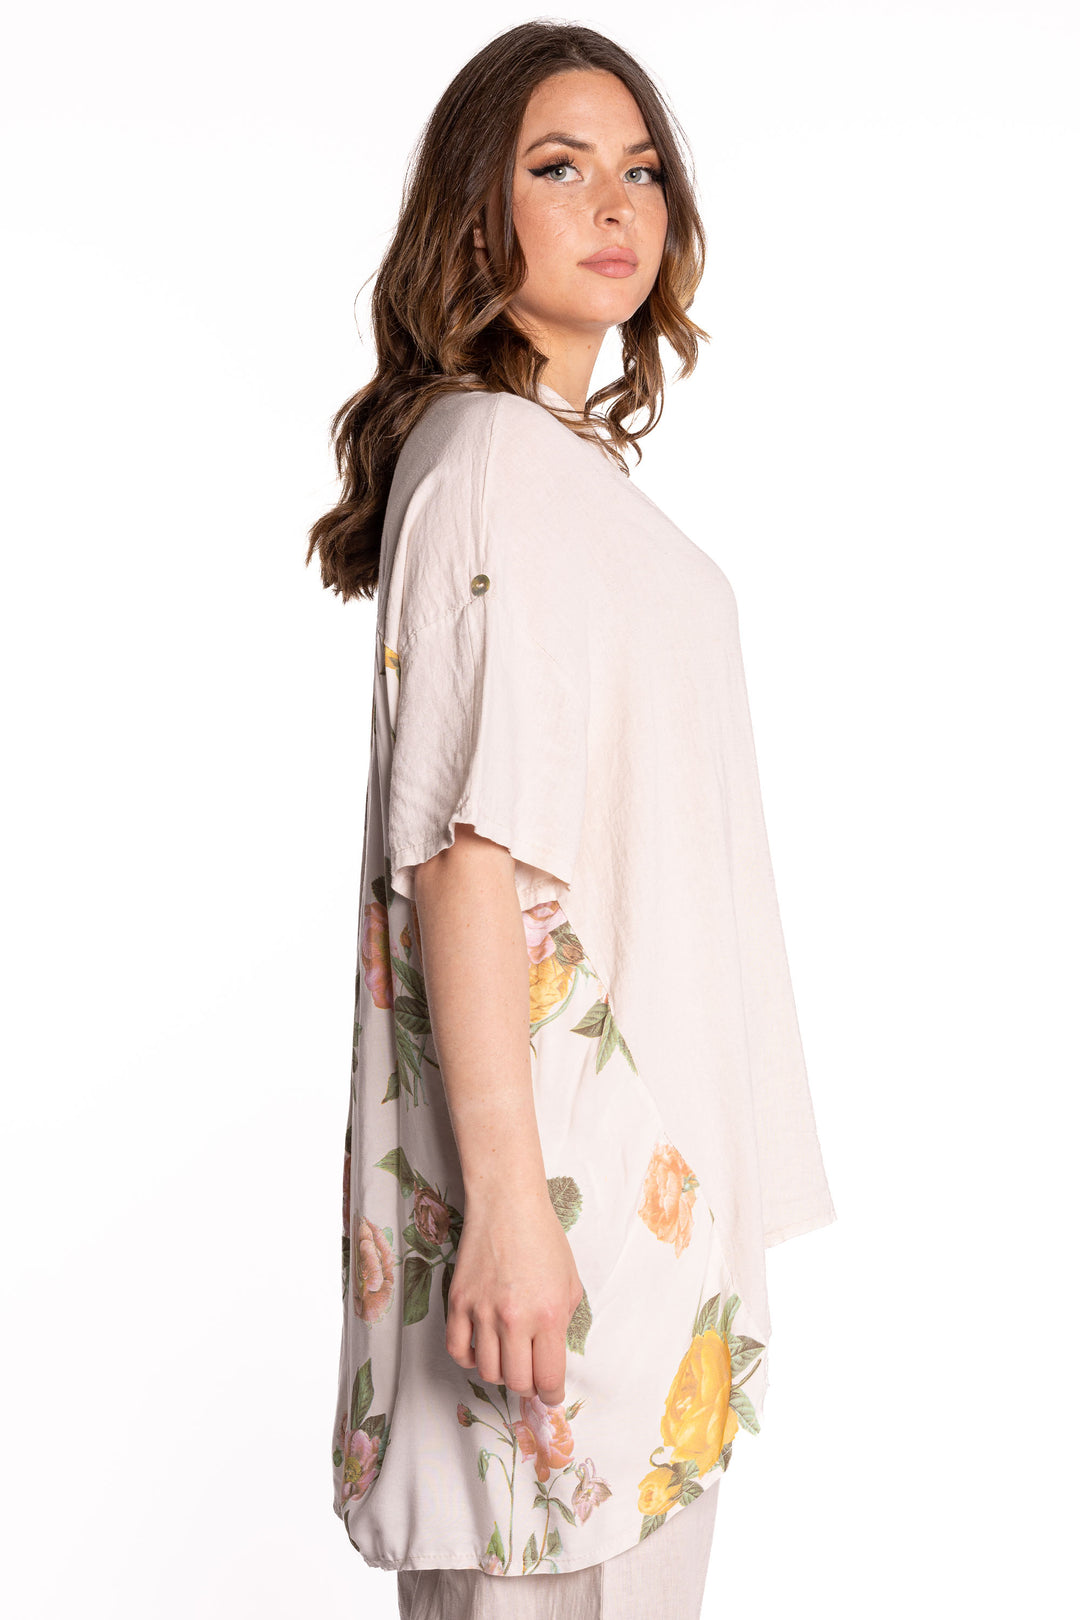 Etern Spring 2023 women's casual high-low linen blouse with floral printed back - sand side